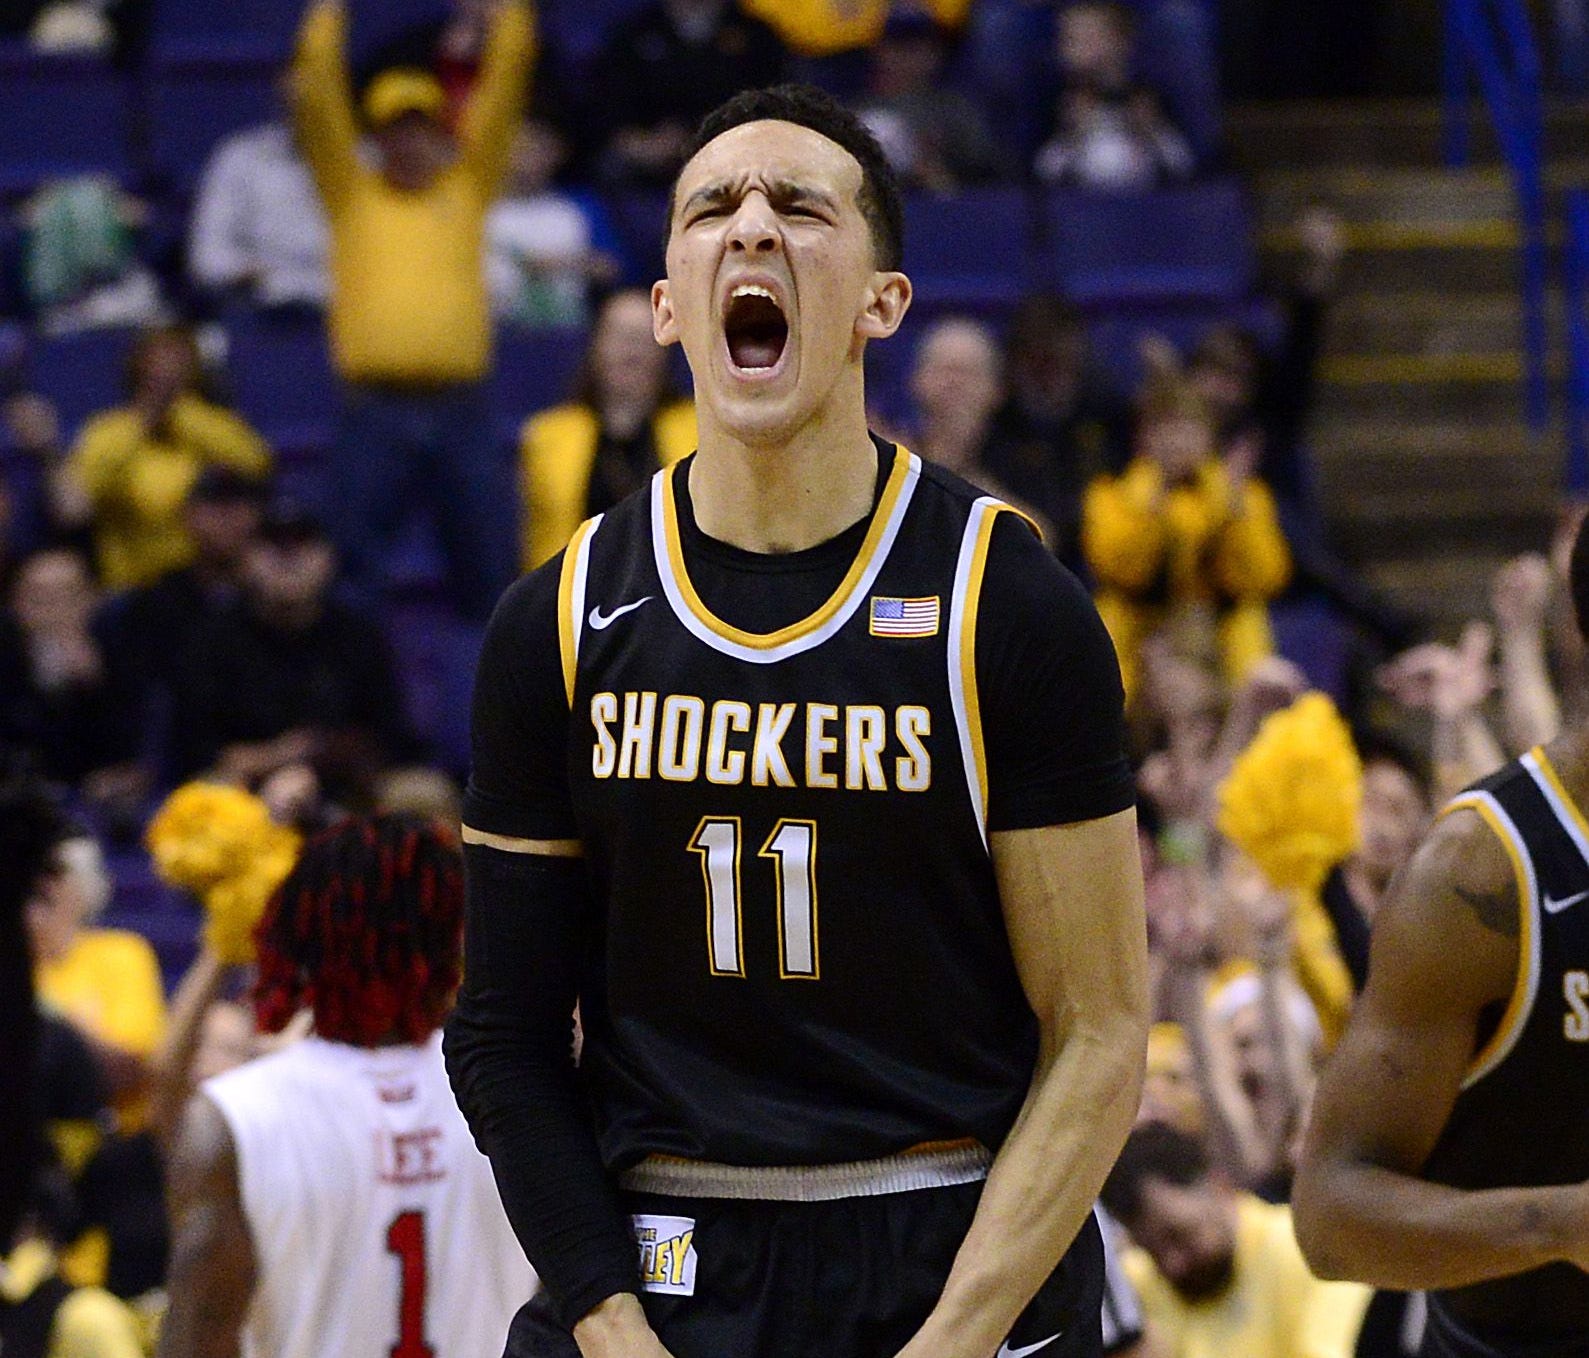 Wichita State Shockers guard Landry Shamet (11) celebrates after scoring against the Illinois State Redbirds during the second half of the Championship game of the Missouri Valley Conference Tournament at Scottrade Center. Wichita State won 71-51.